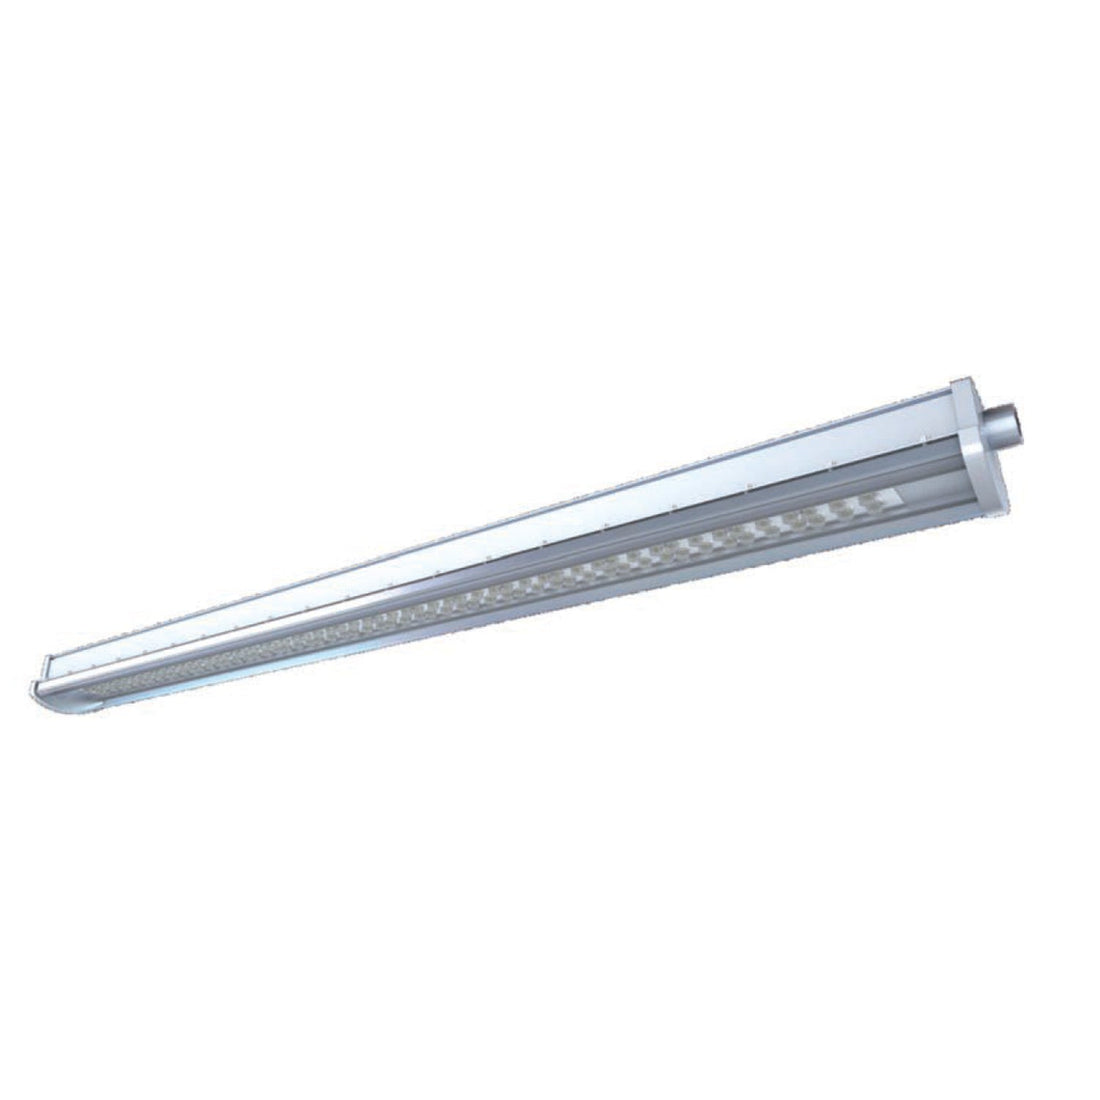 FLF Series 80W 4FT LED Explosion Proof Low Bay Linear Light - 5000K Daylight, 5600LM, 0-10V Dimming, IP66 Rated, Hazardous Location Lighting Fixtures